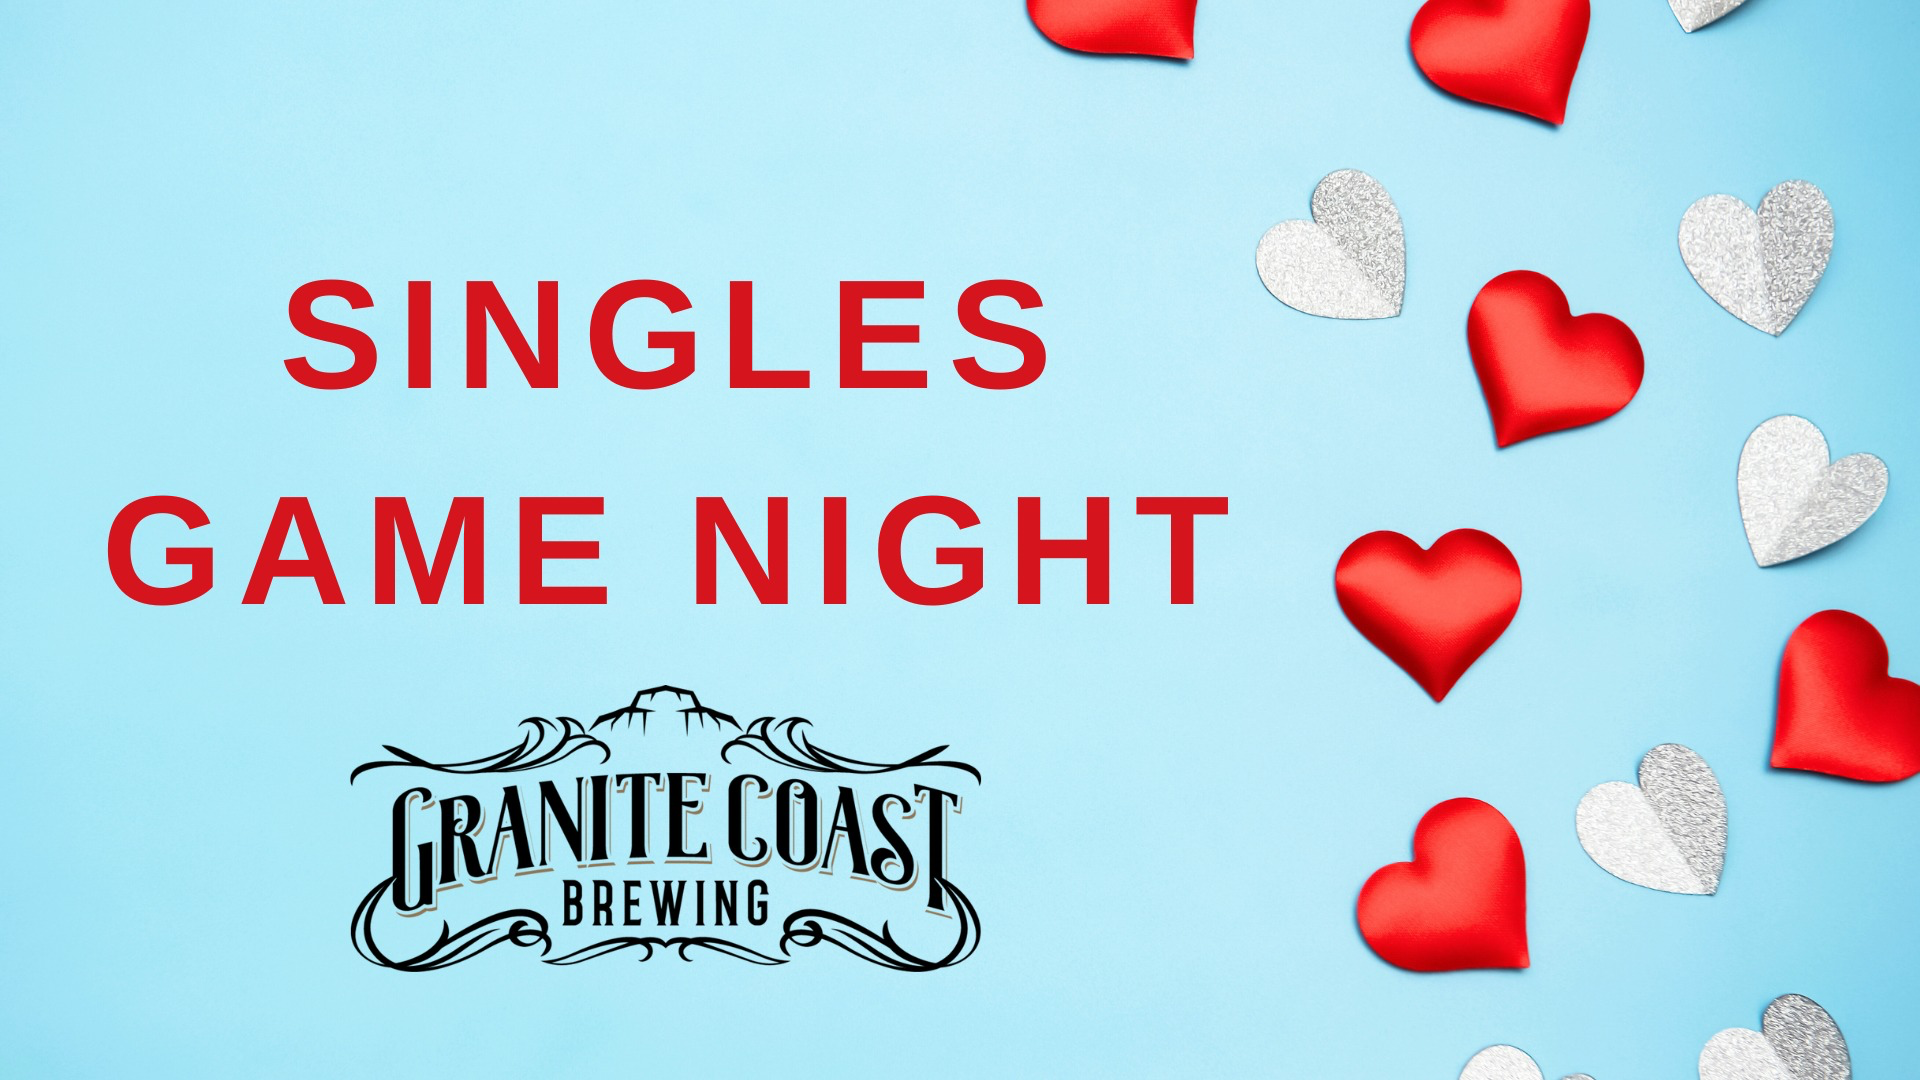 Join us for a fun-filled singles game night by the beautiful Granite Coast! Don't miss this great chance to meet fellow singles, enjoy exciting games and admire the stunning coastal view. Perfect for those looking to blend socializing with an entertaining evening.